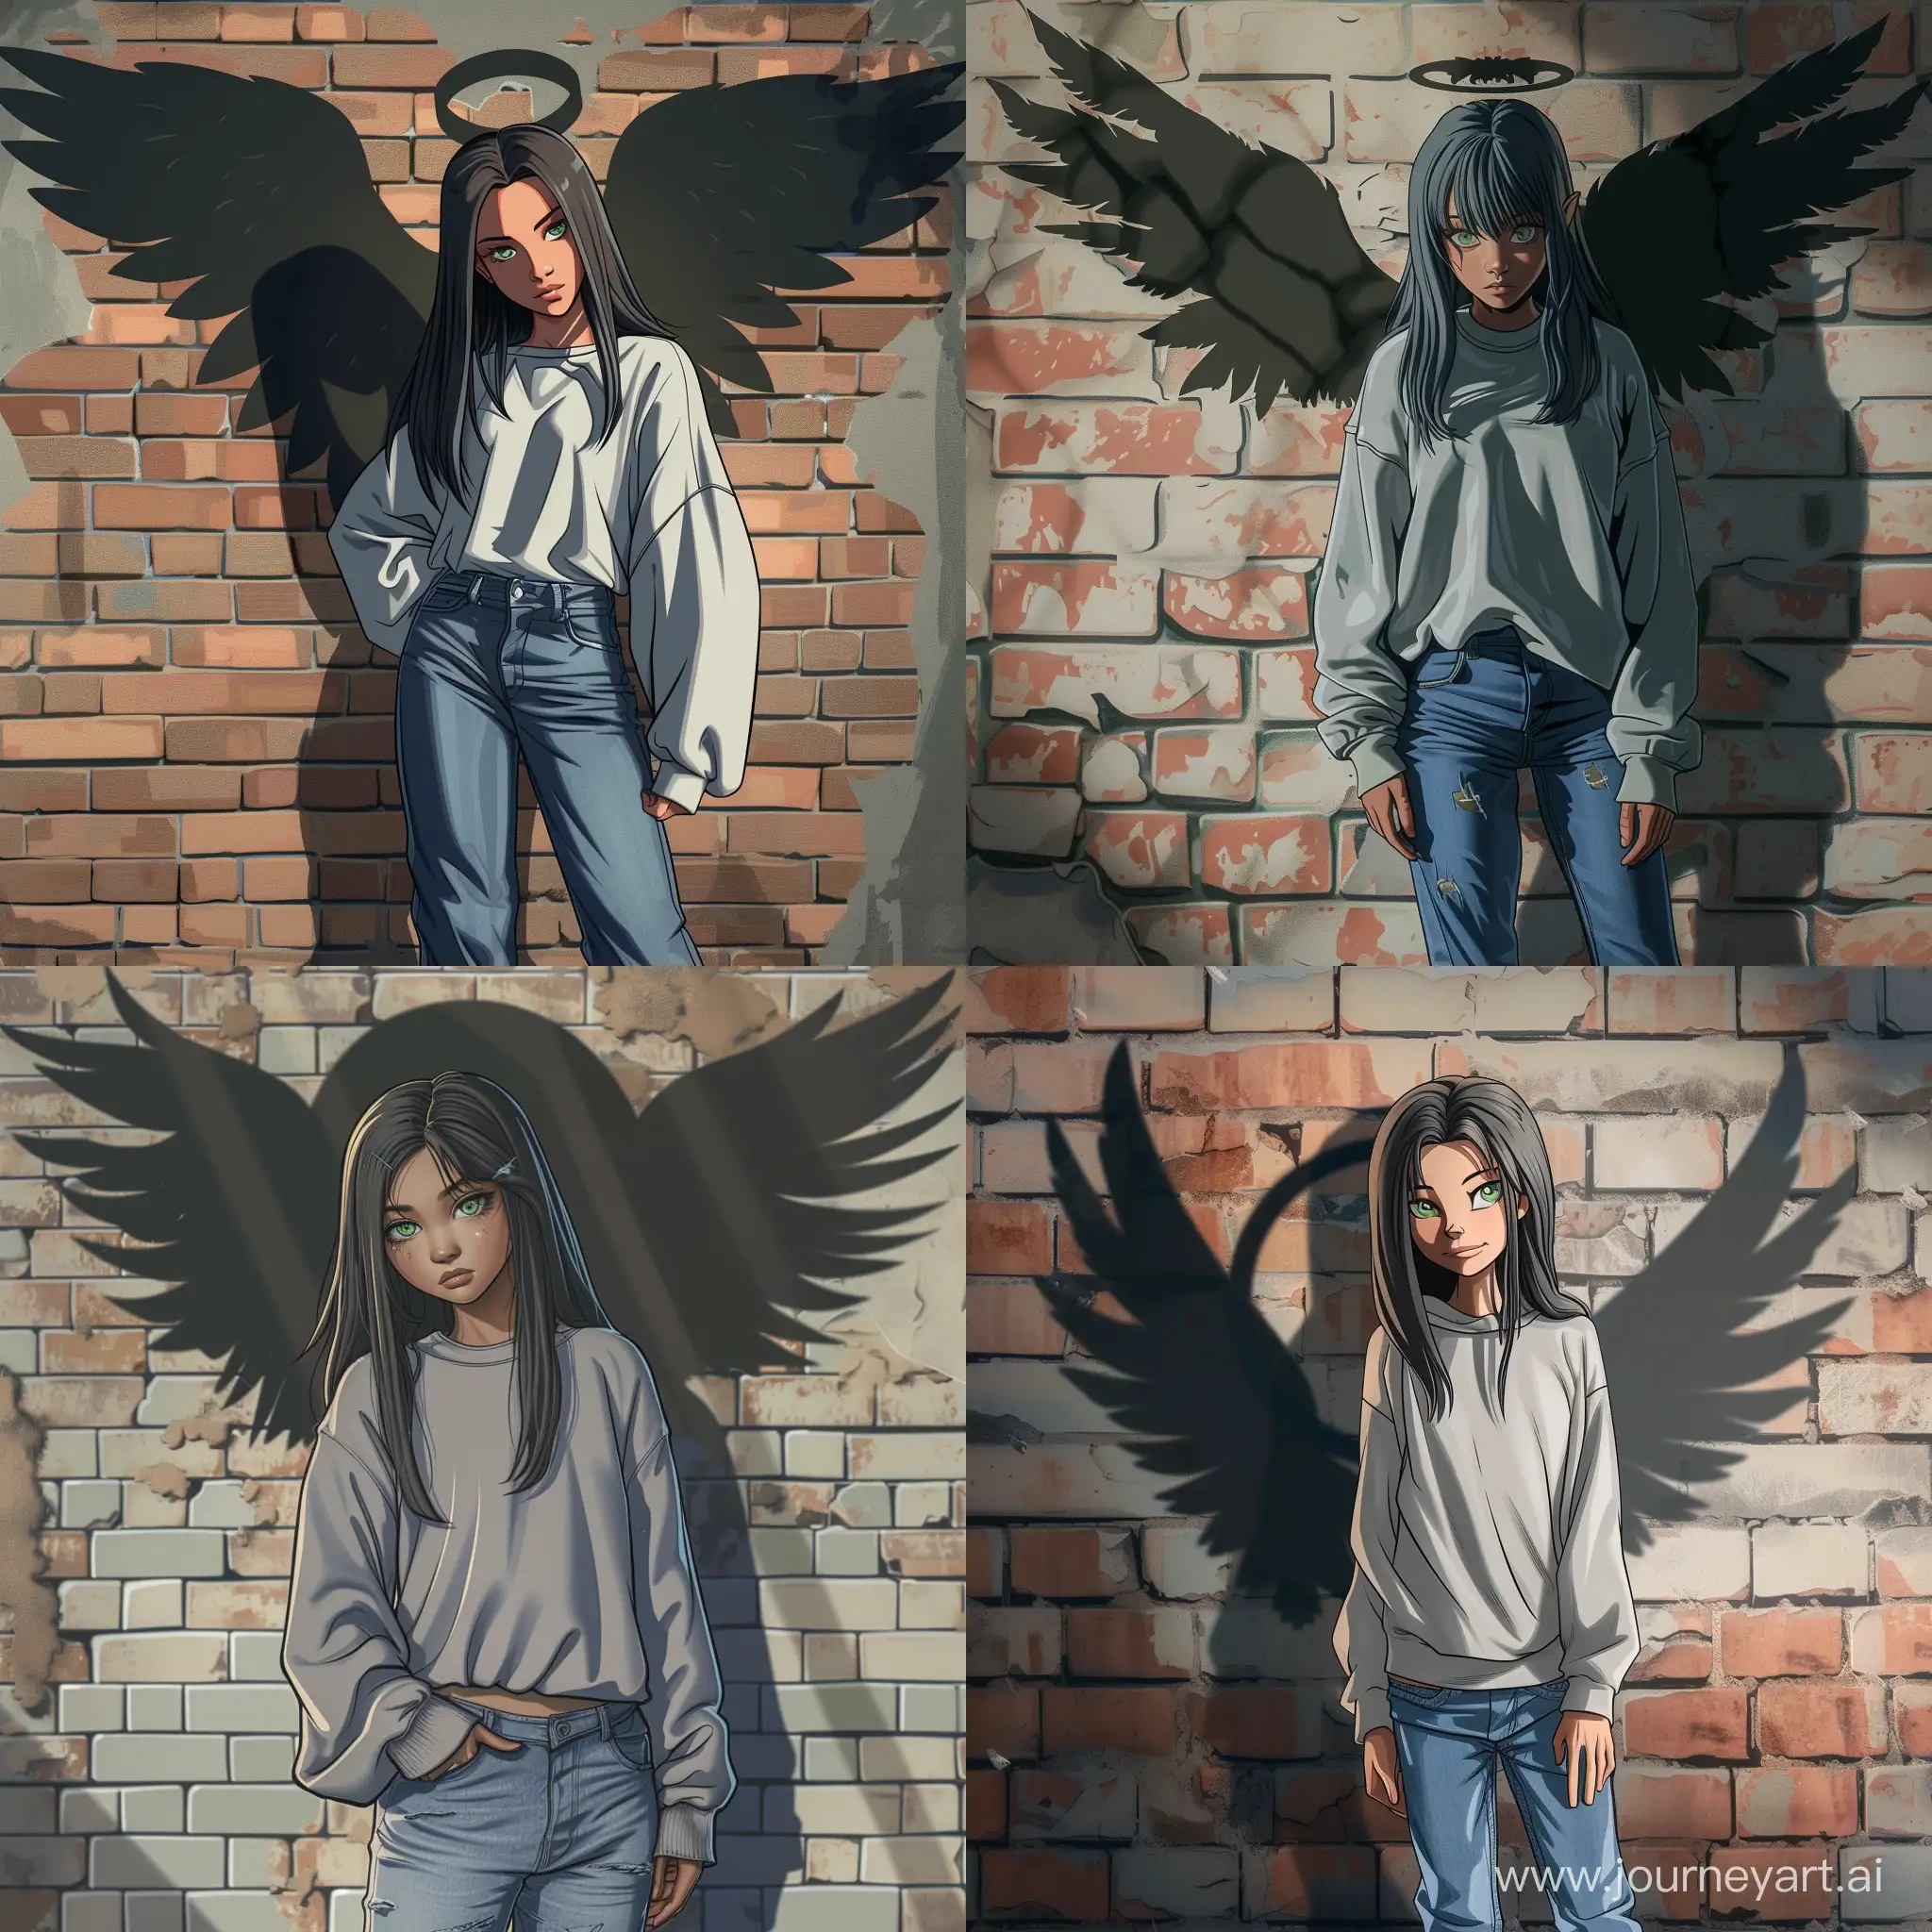 Teenage-Girl-with-Angelic-Aura-Against-Brick-Wall-Background